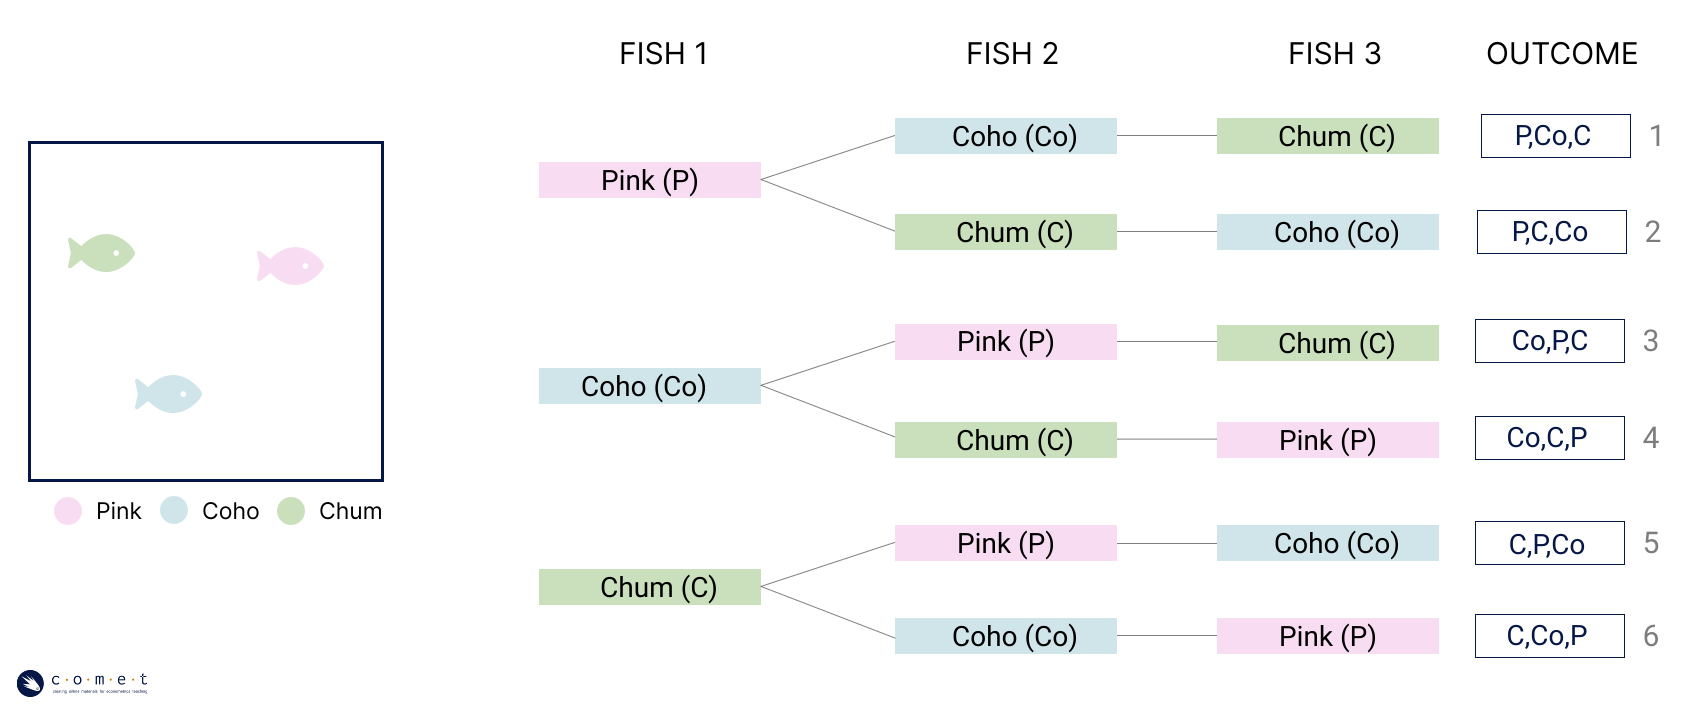 A tree diagram showing that there are sie possible outcomes from a pond with this combination of fish